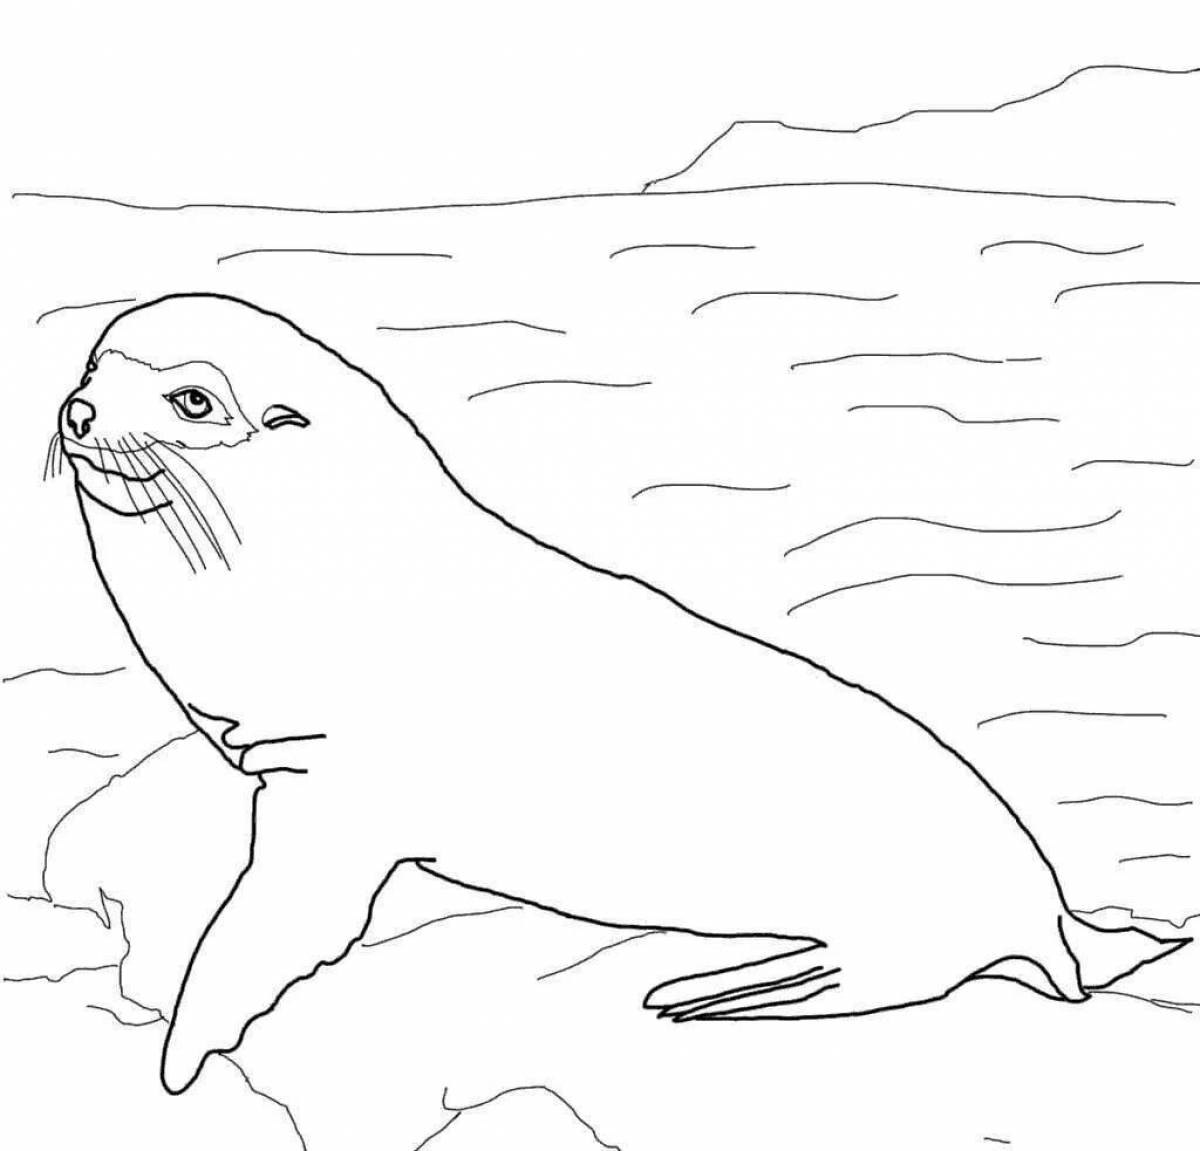 Playful baikal seal coloring page for kids